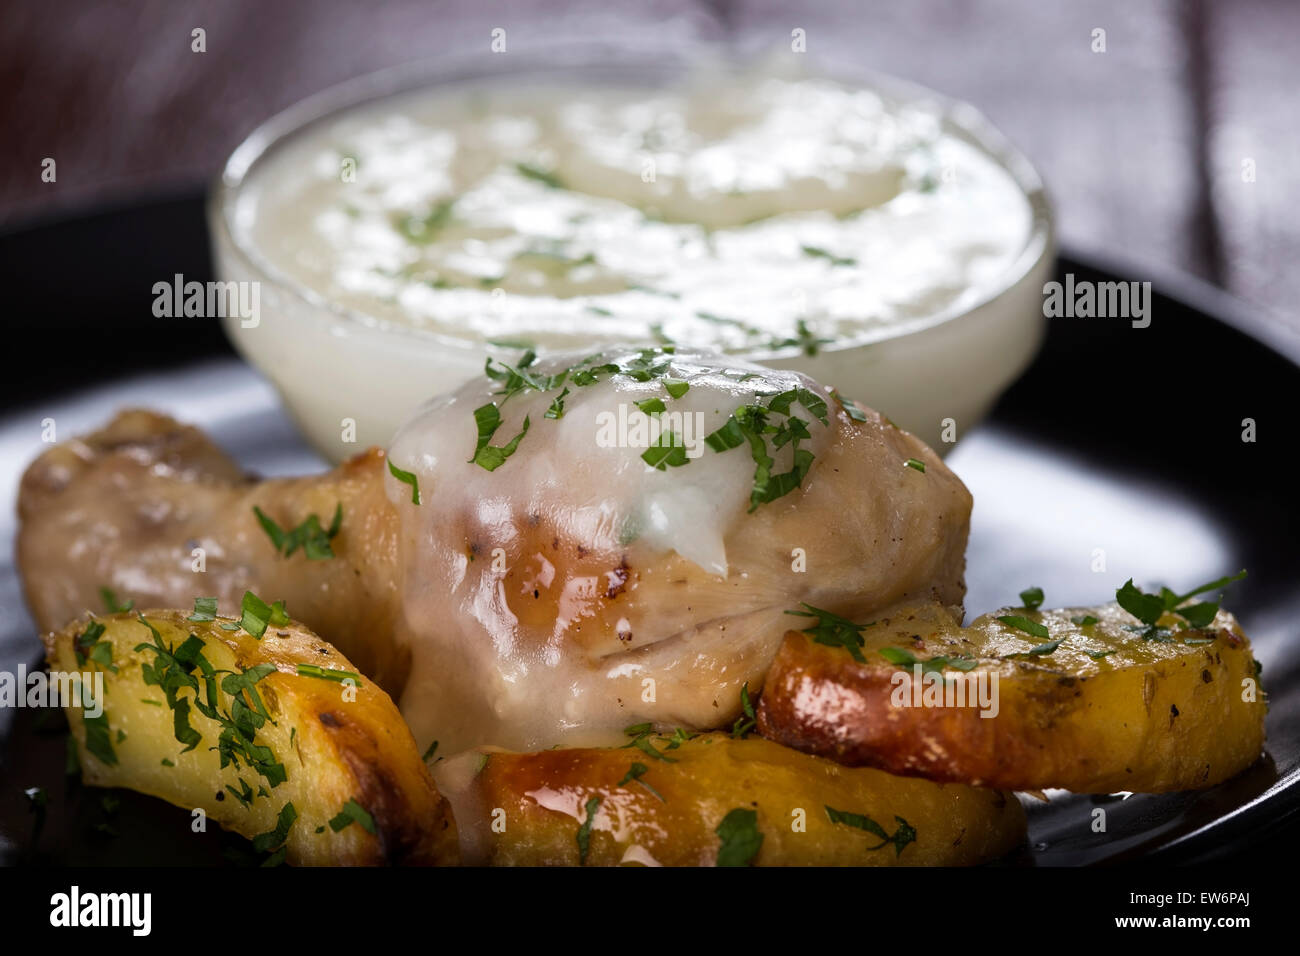 Baked potatoes with roasted chicken drumstick and garlic sauce Stock Photo